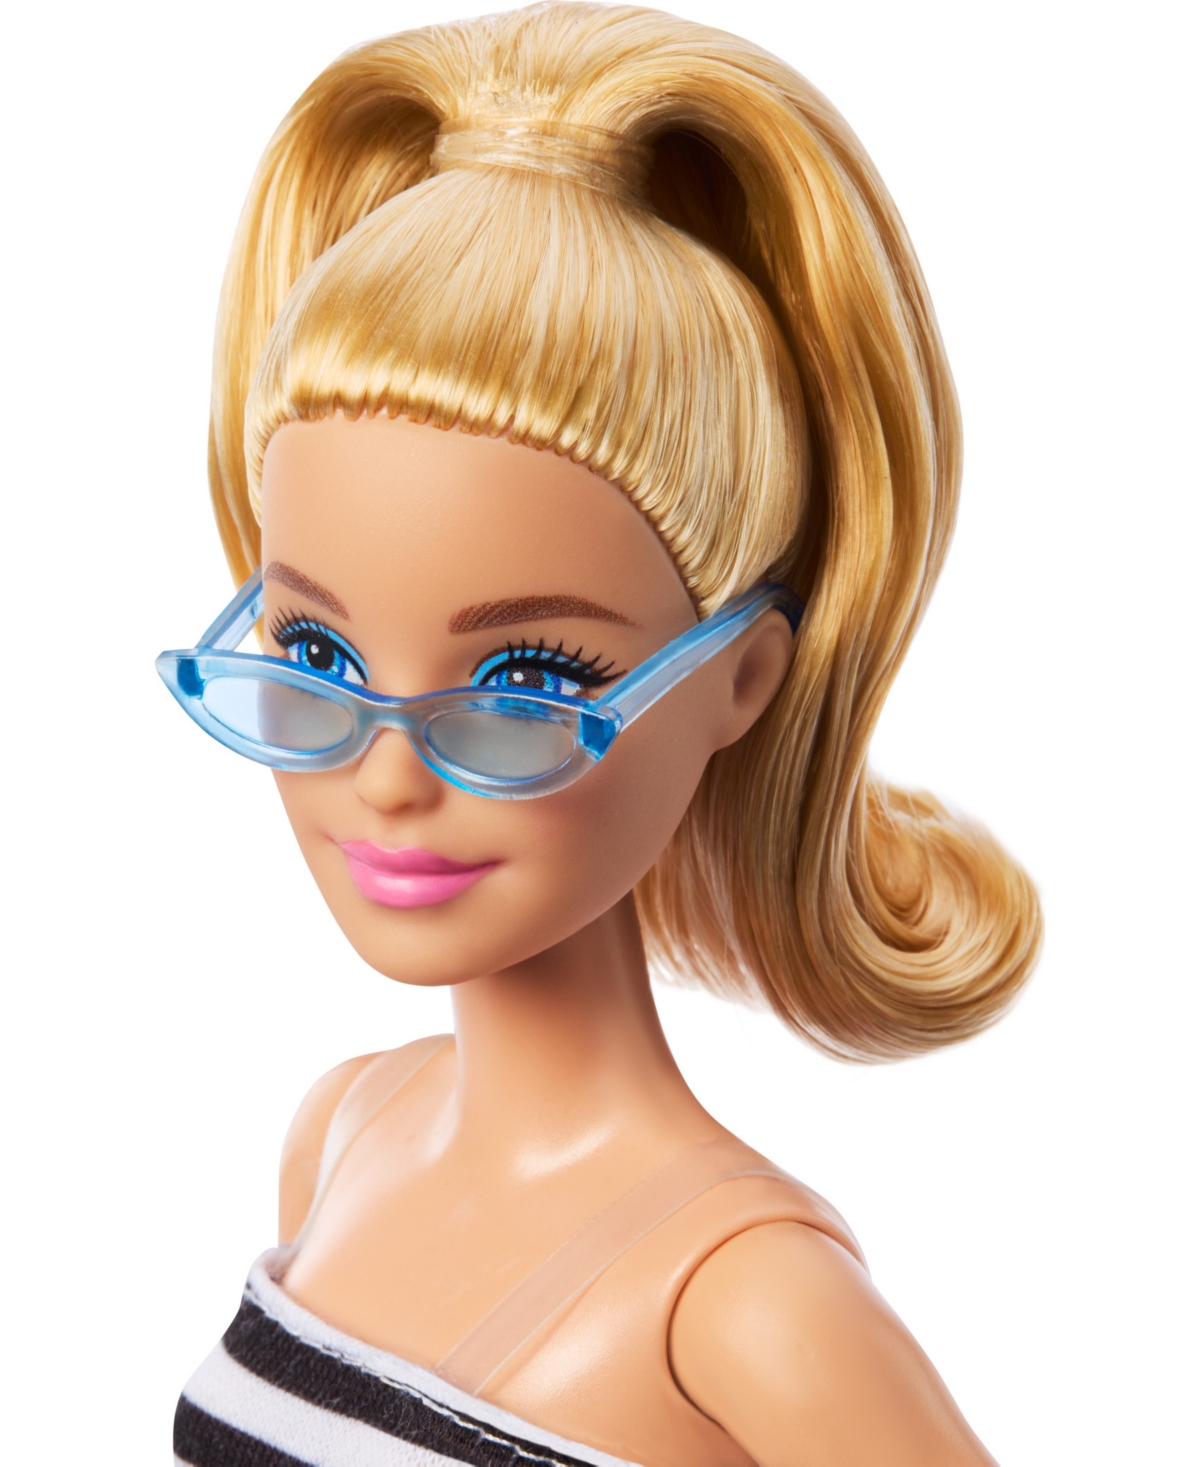 Shop Barbie Fashionistas Doll 213, Blonde With Striped Top, Pink Skirt And Sunglasses, 65th Anniversary In Multi